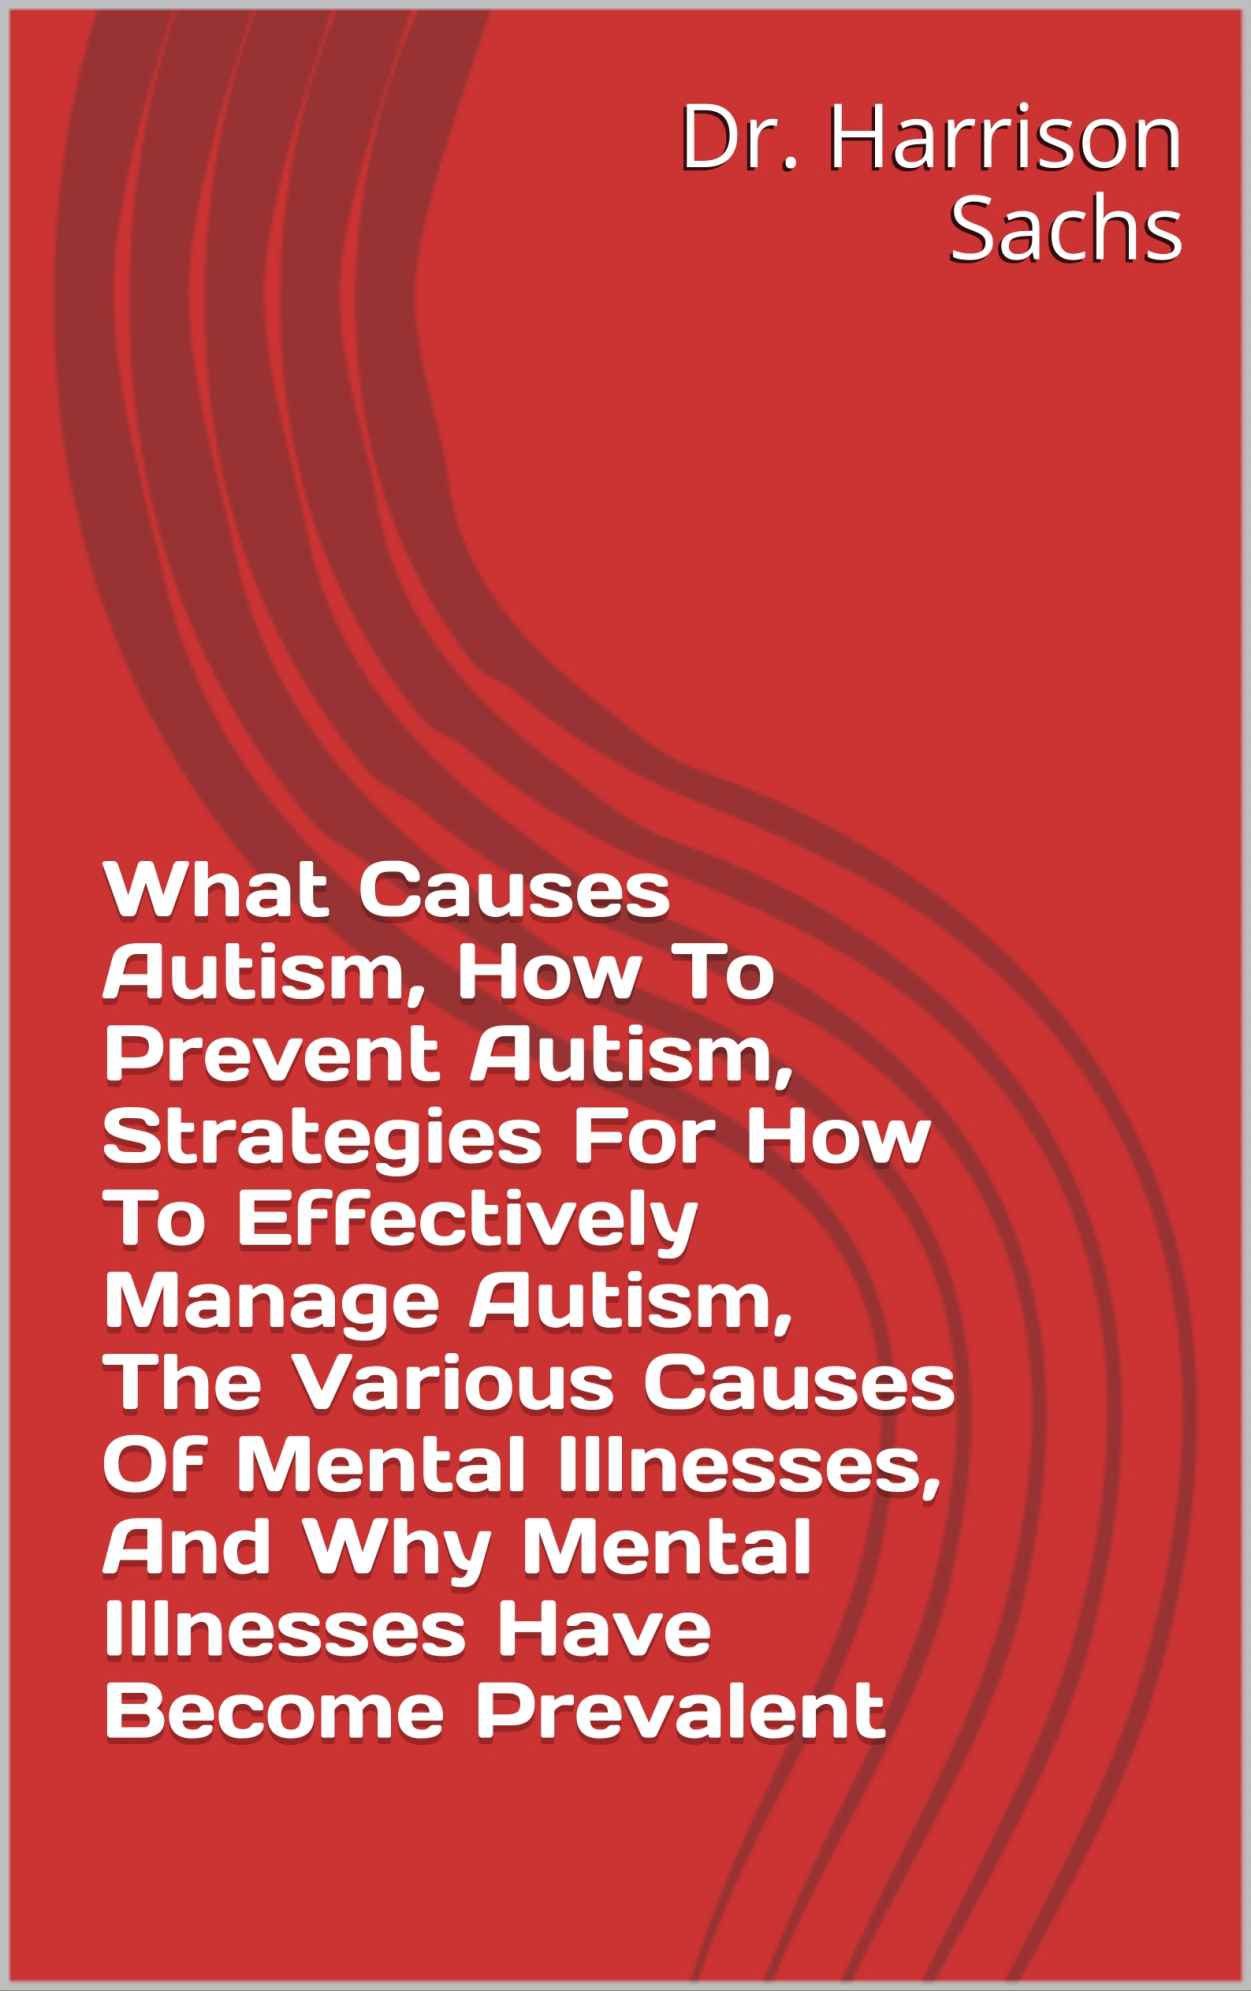 What Causes Autism, How To Prevent Autism,Strategies For How To - PDF